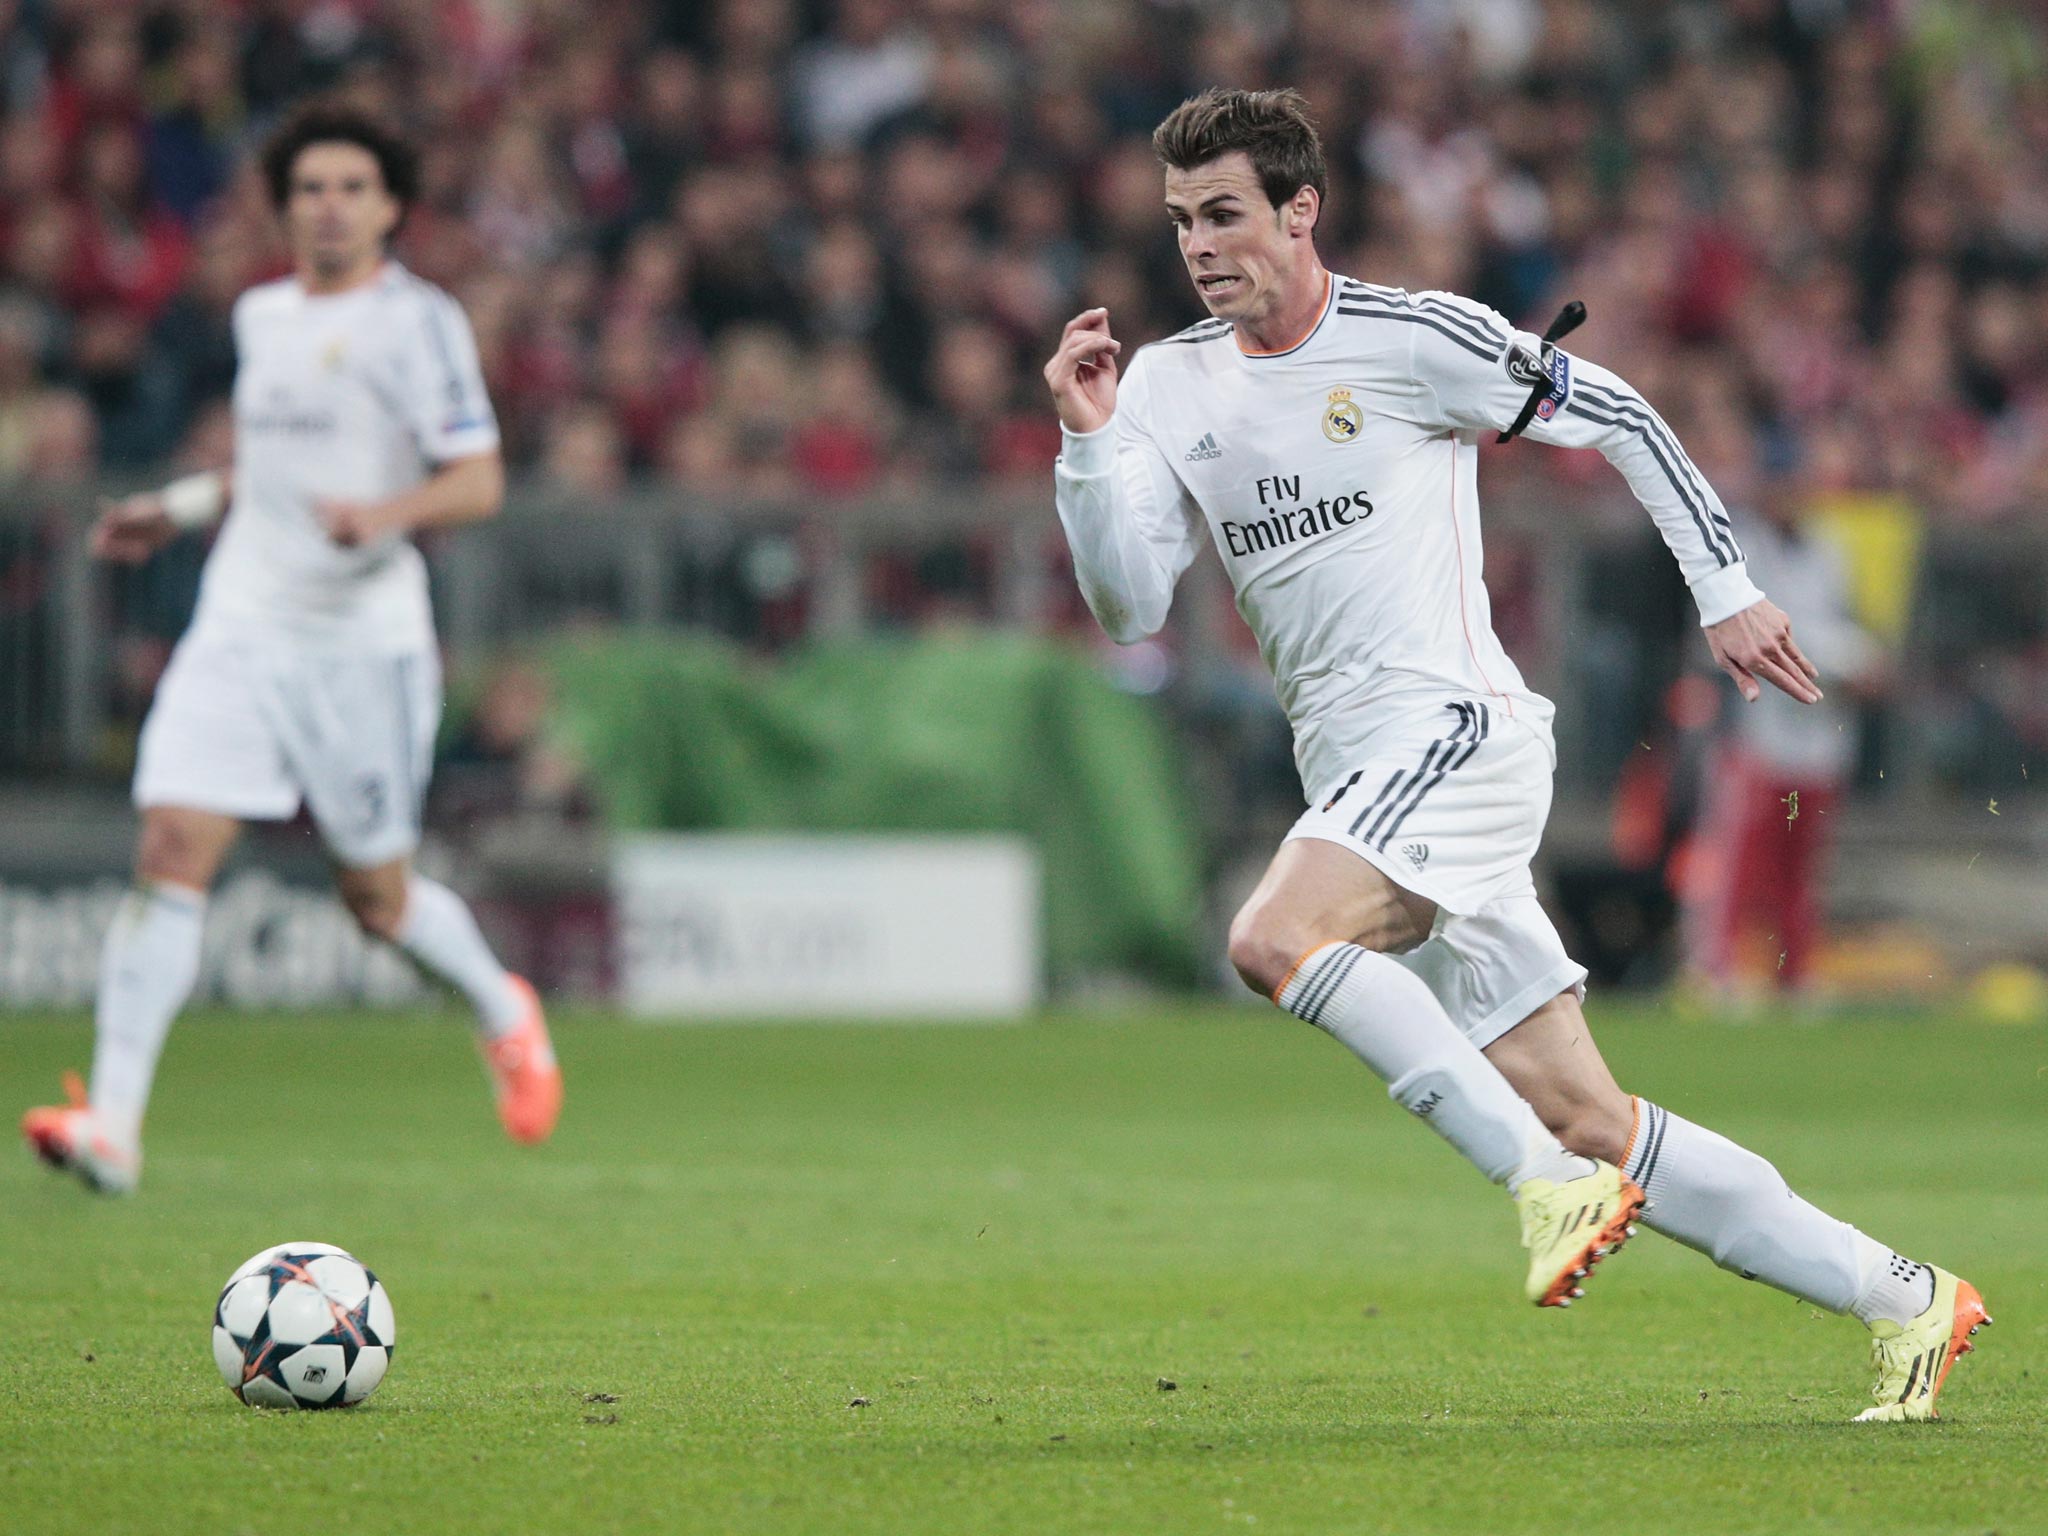 Gareth Bale wants to end his season with victory in the Champions League final